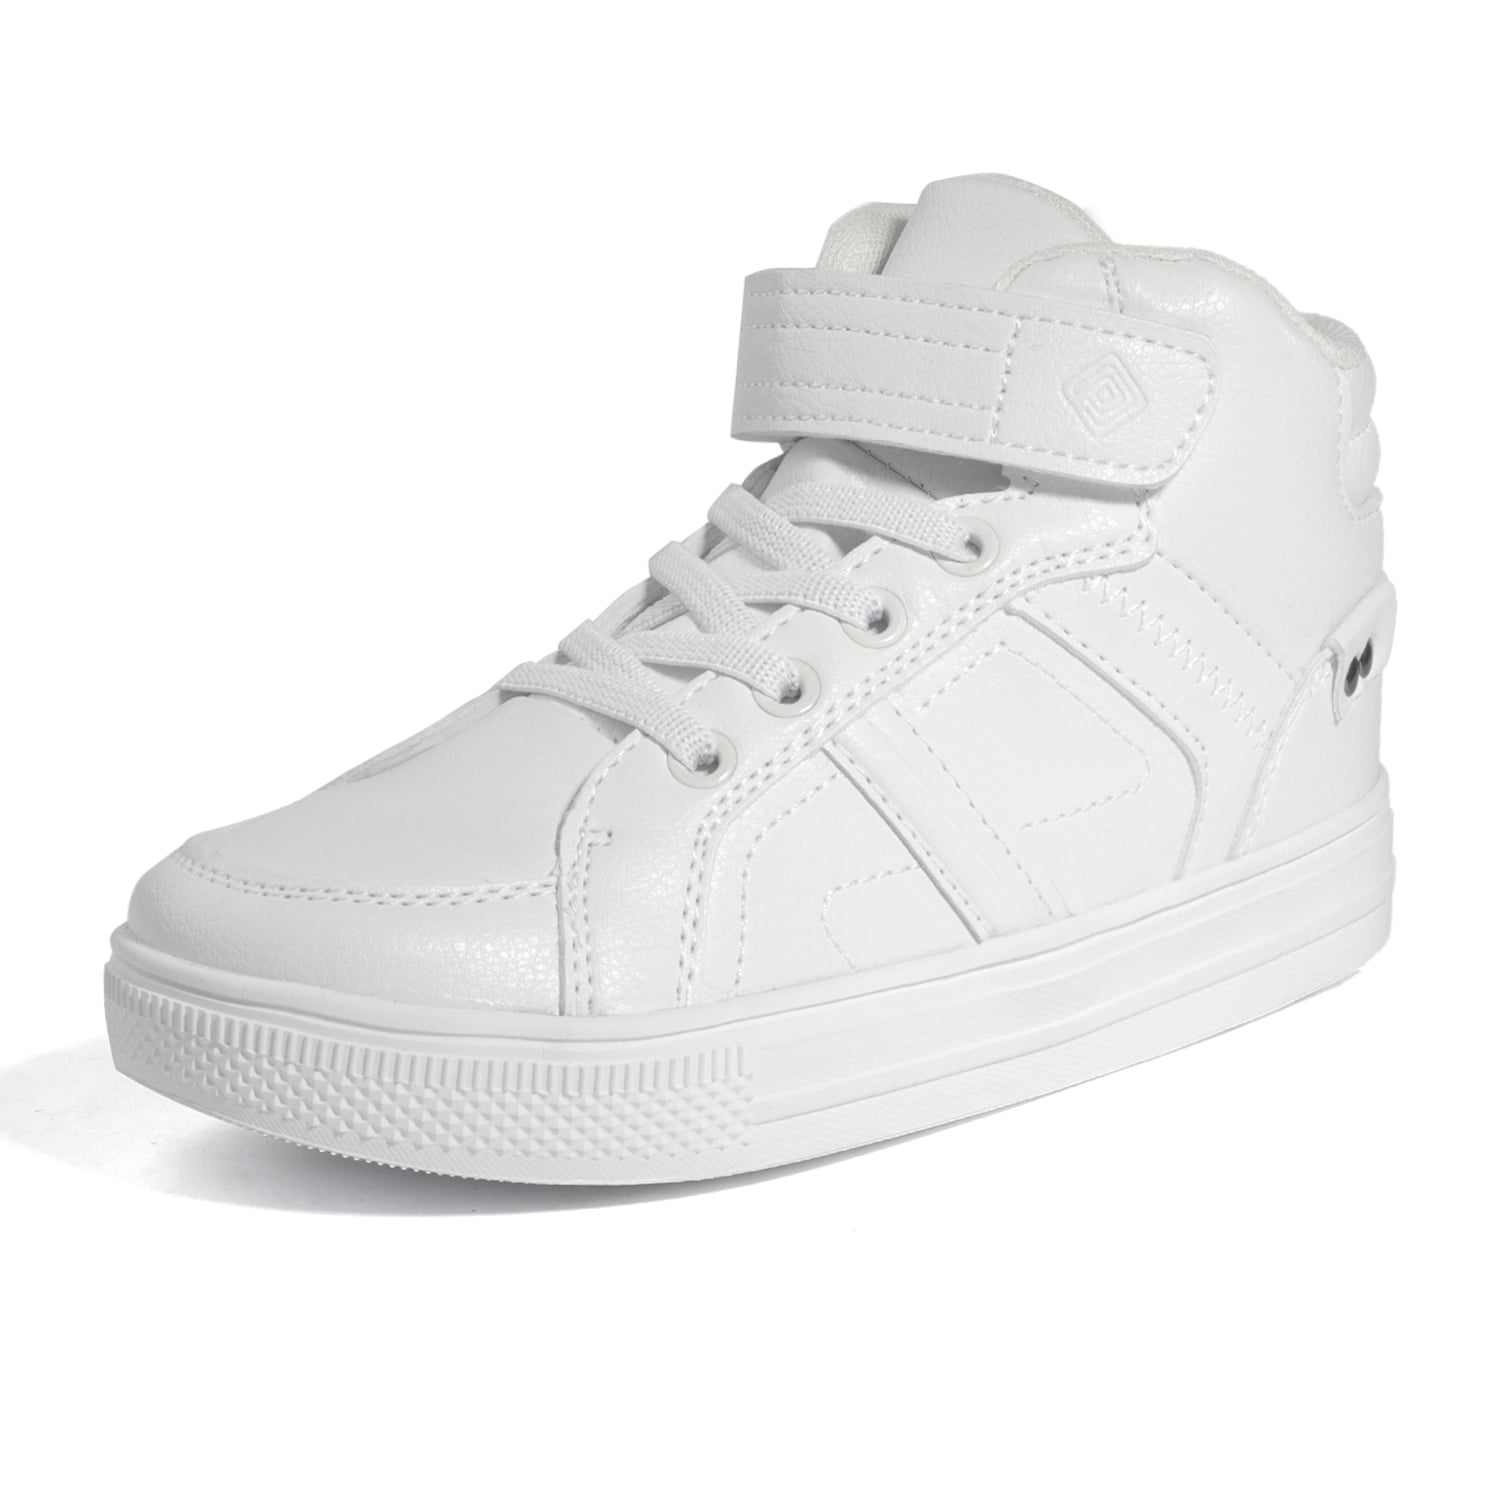 DREAM PAIRS Boys High Top Sneaker Shoes 151014_H WHITE Size 11 ...